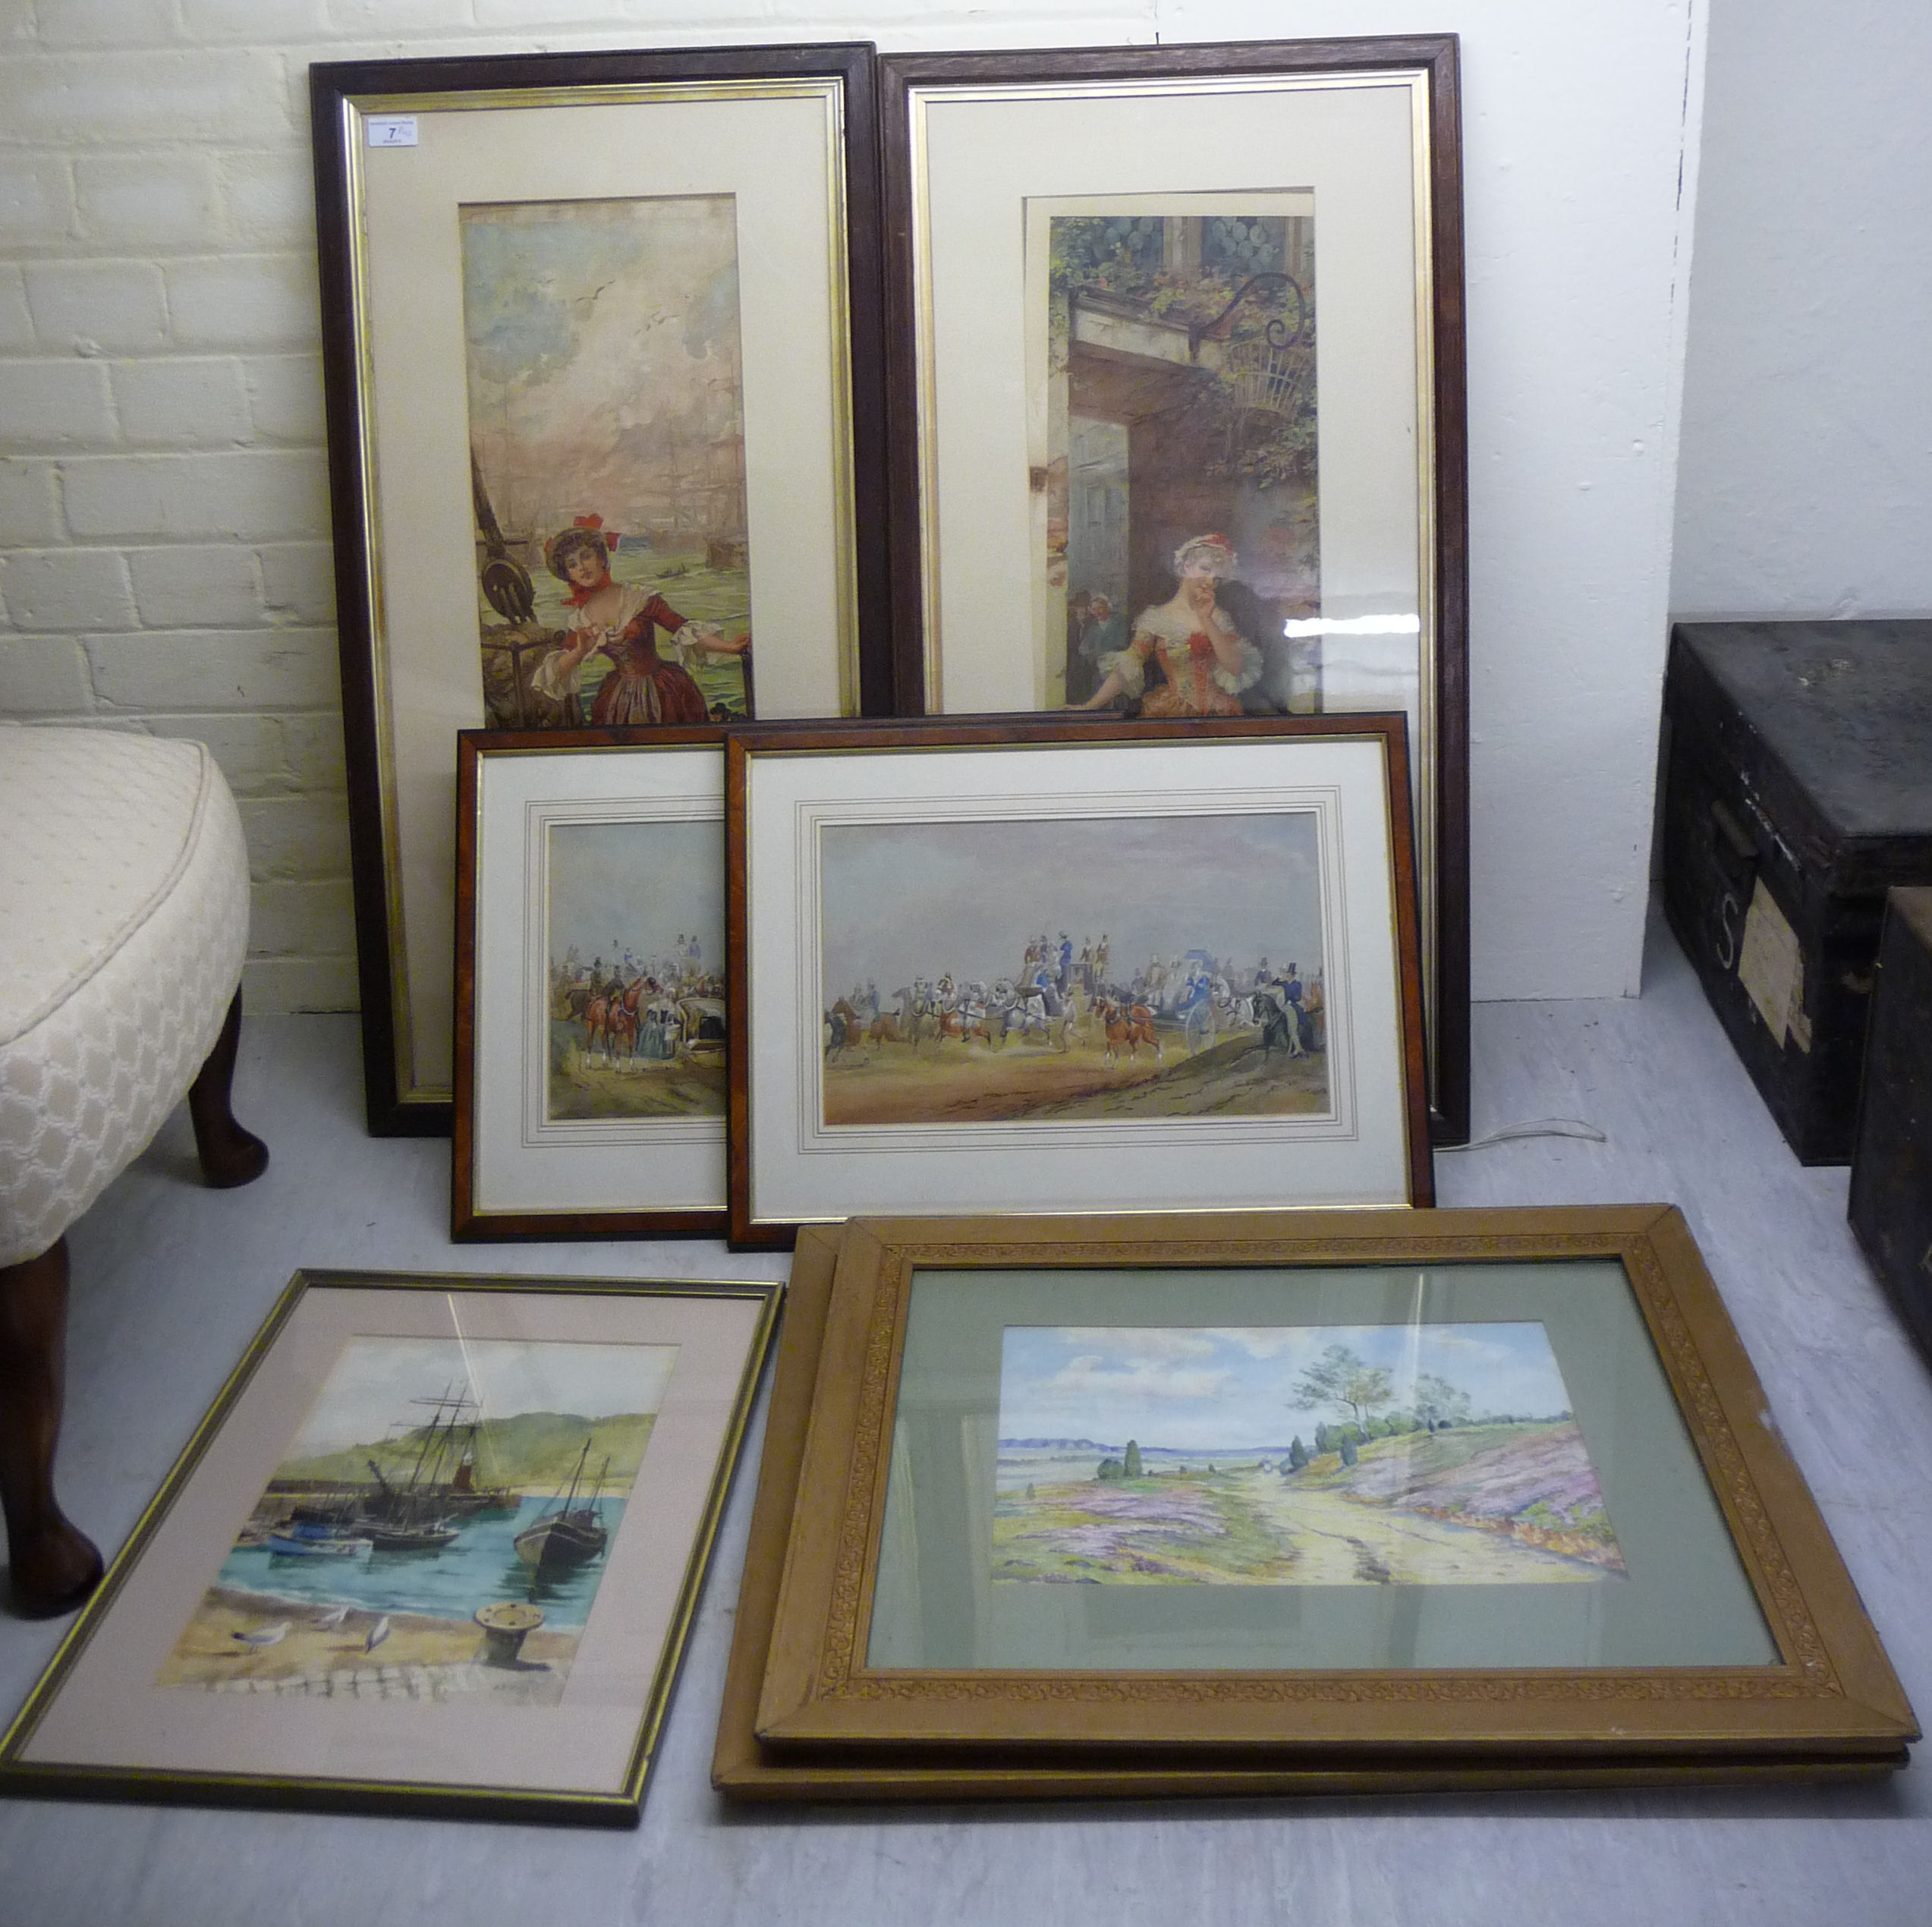 Framed pictures and prints: to include JGR - a Victorian scene with horsedrawn carriages